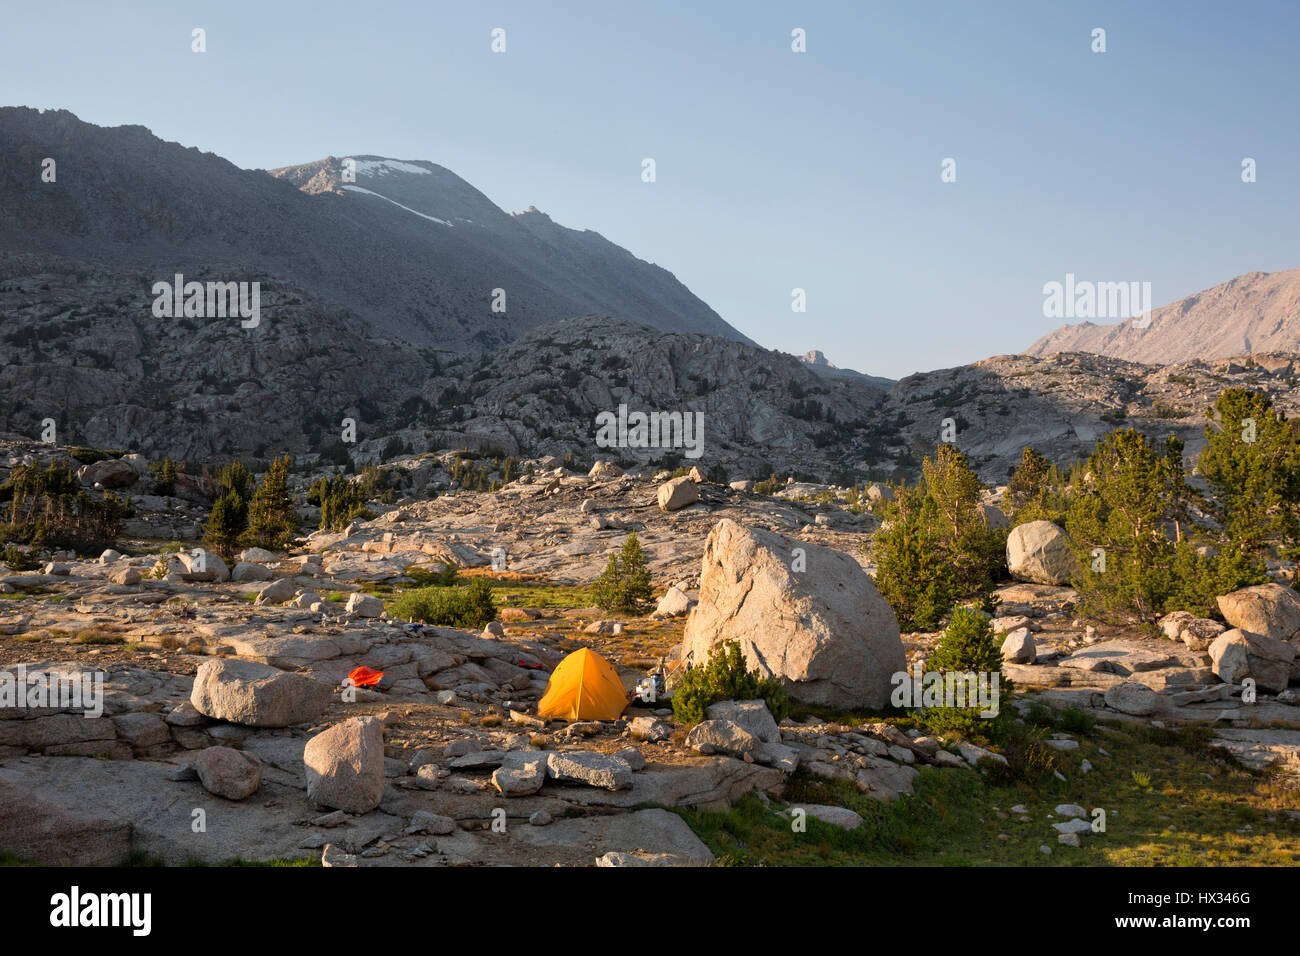 CA03109-00...CALIFORNIA - Campsite on Darwin Bench in Kings Canyon National Park. Stock Photo